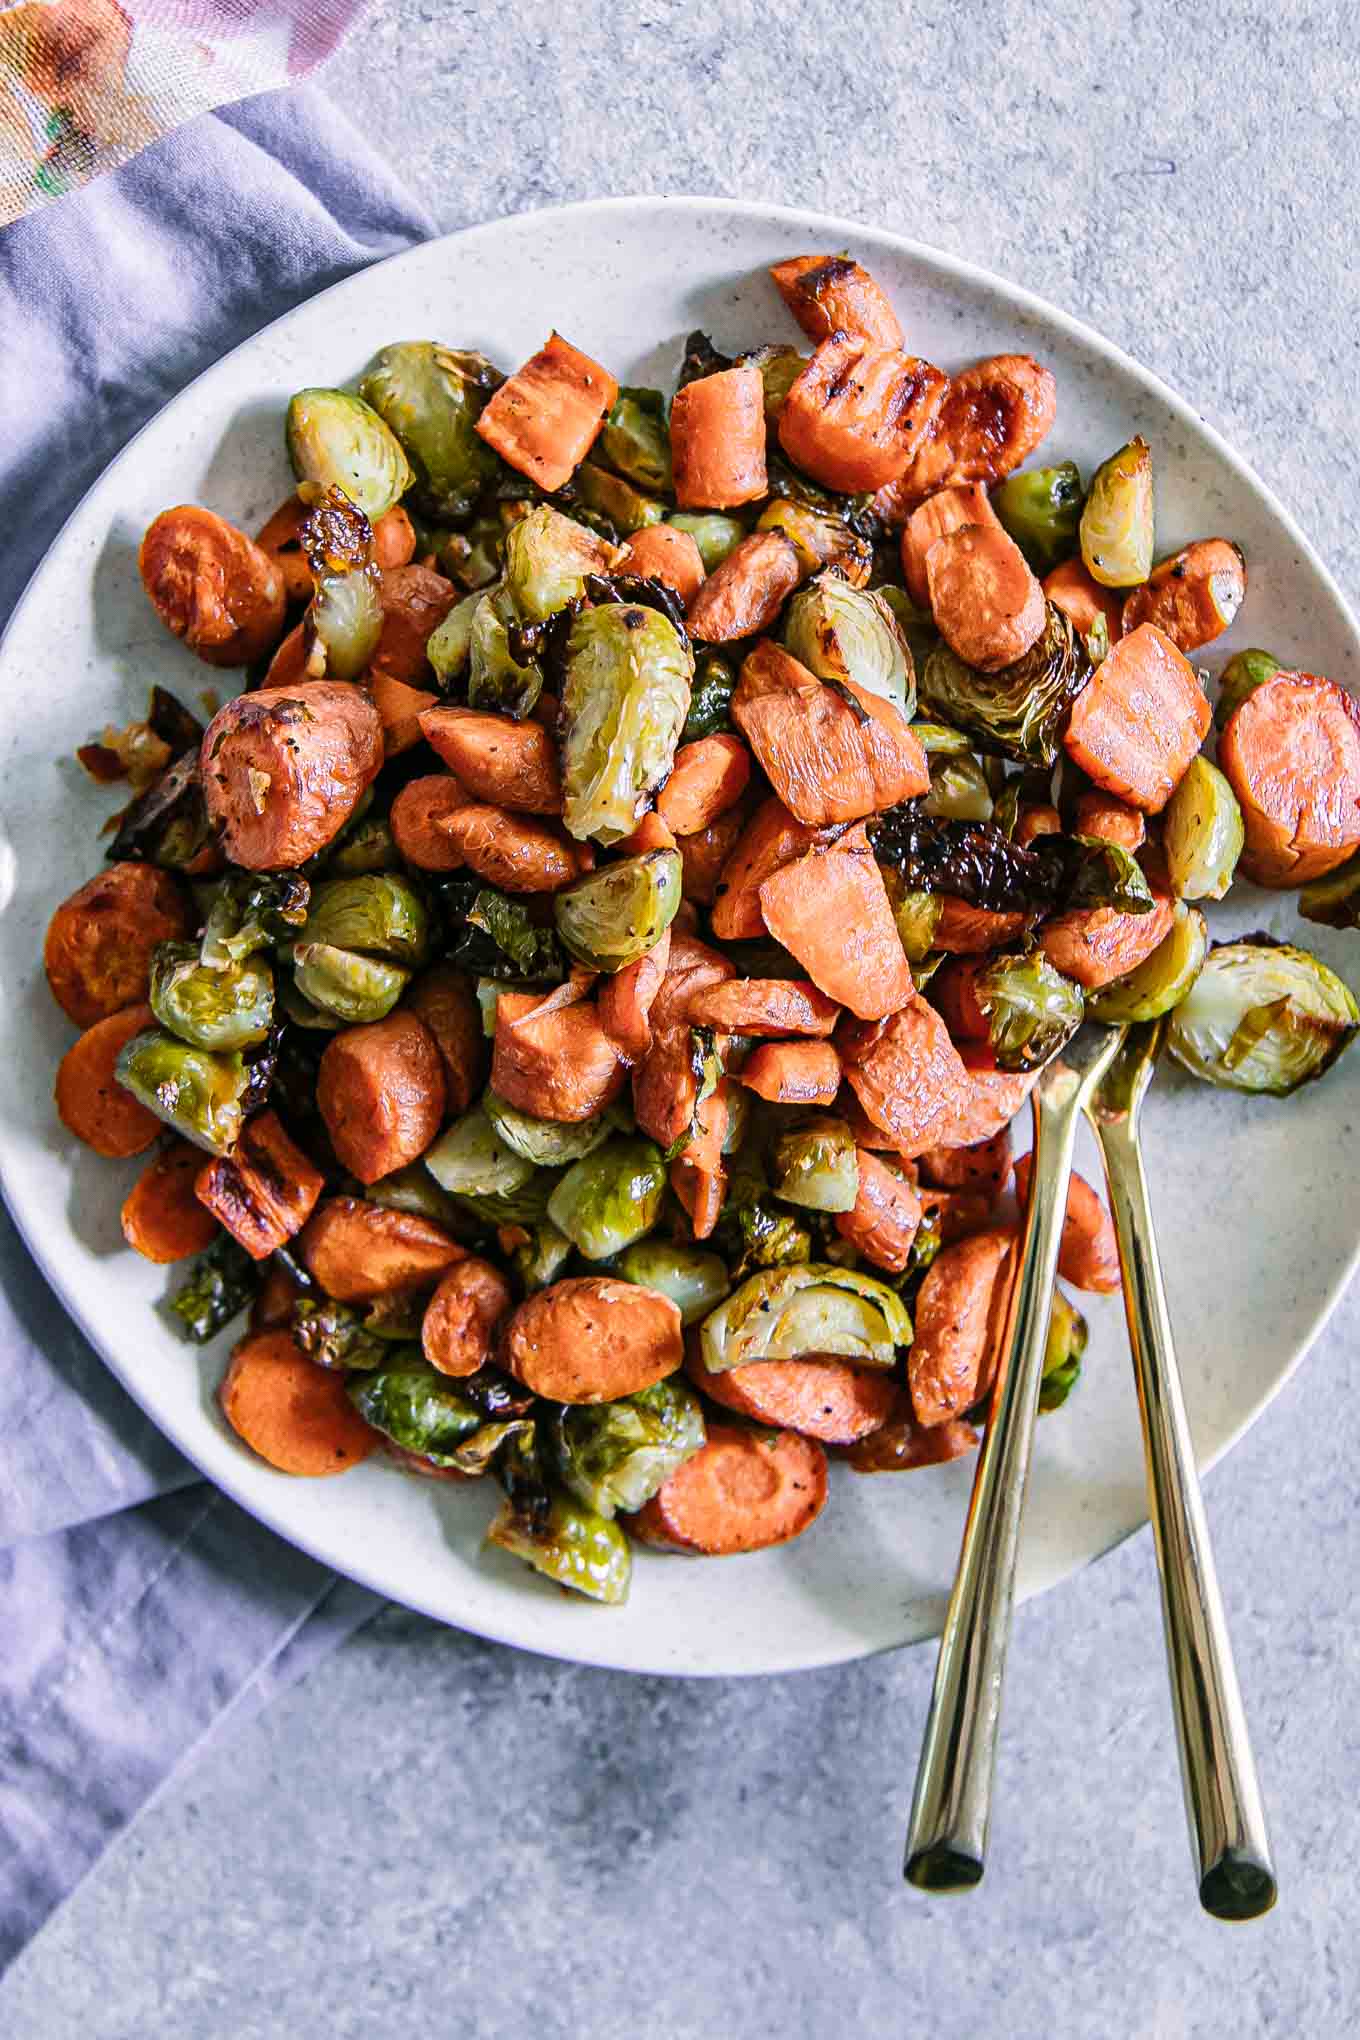 Roasted Carrots and Brussels Sprouts